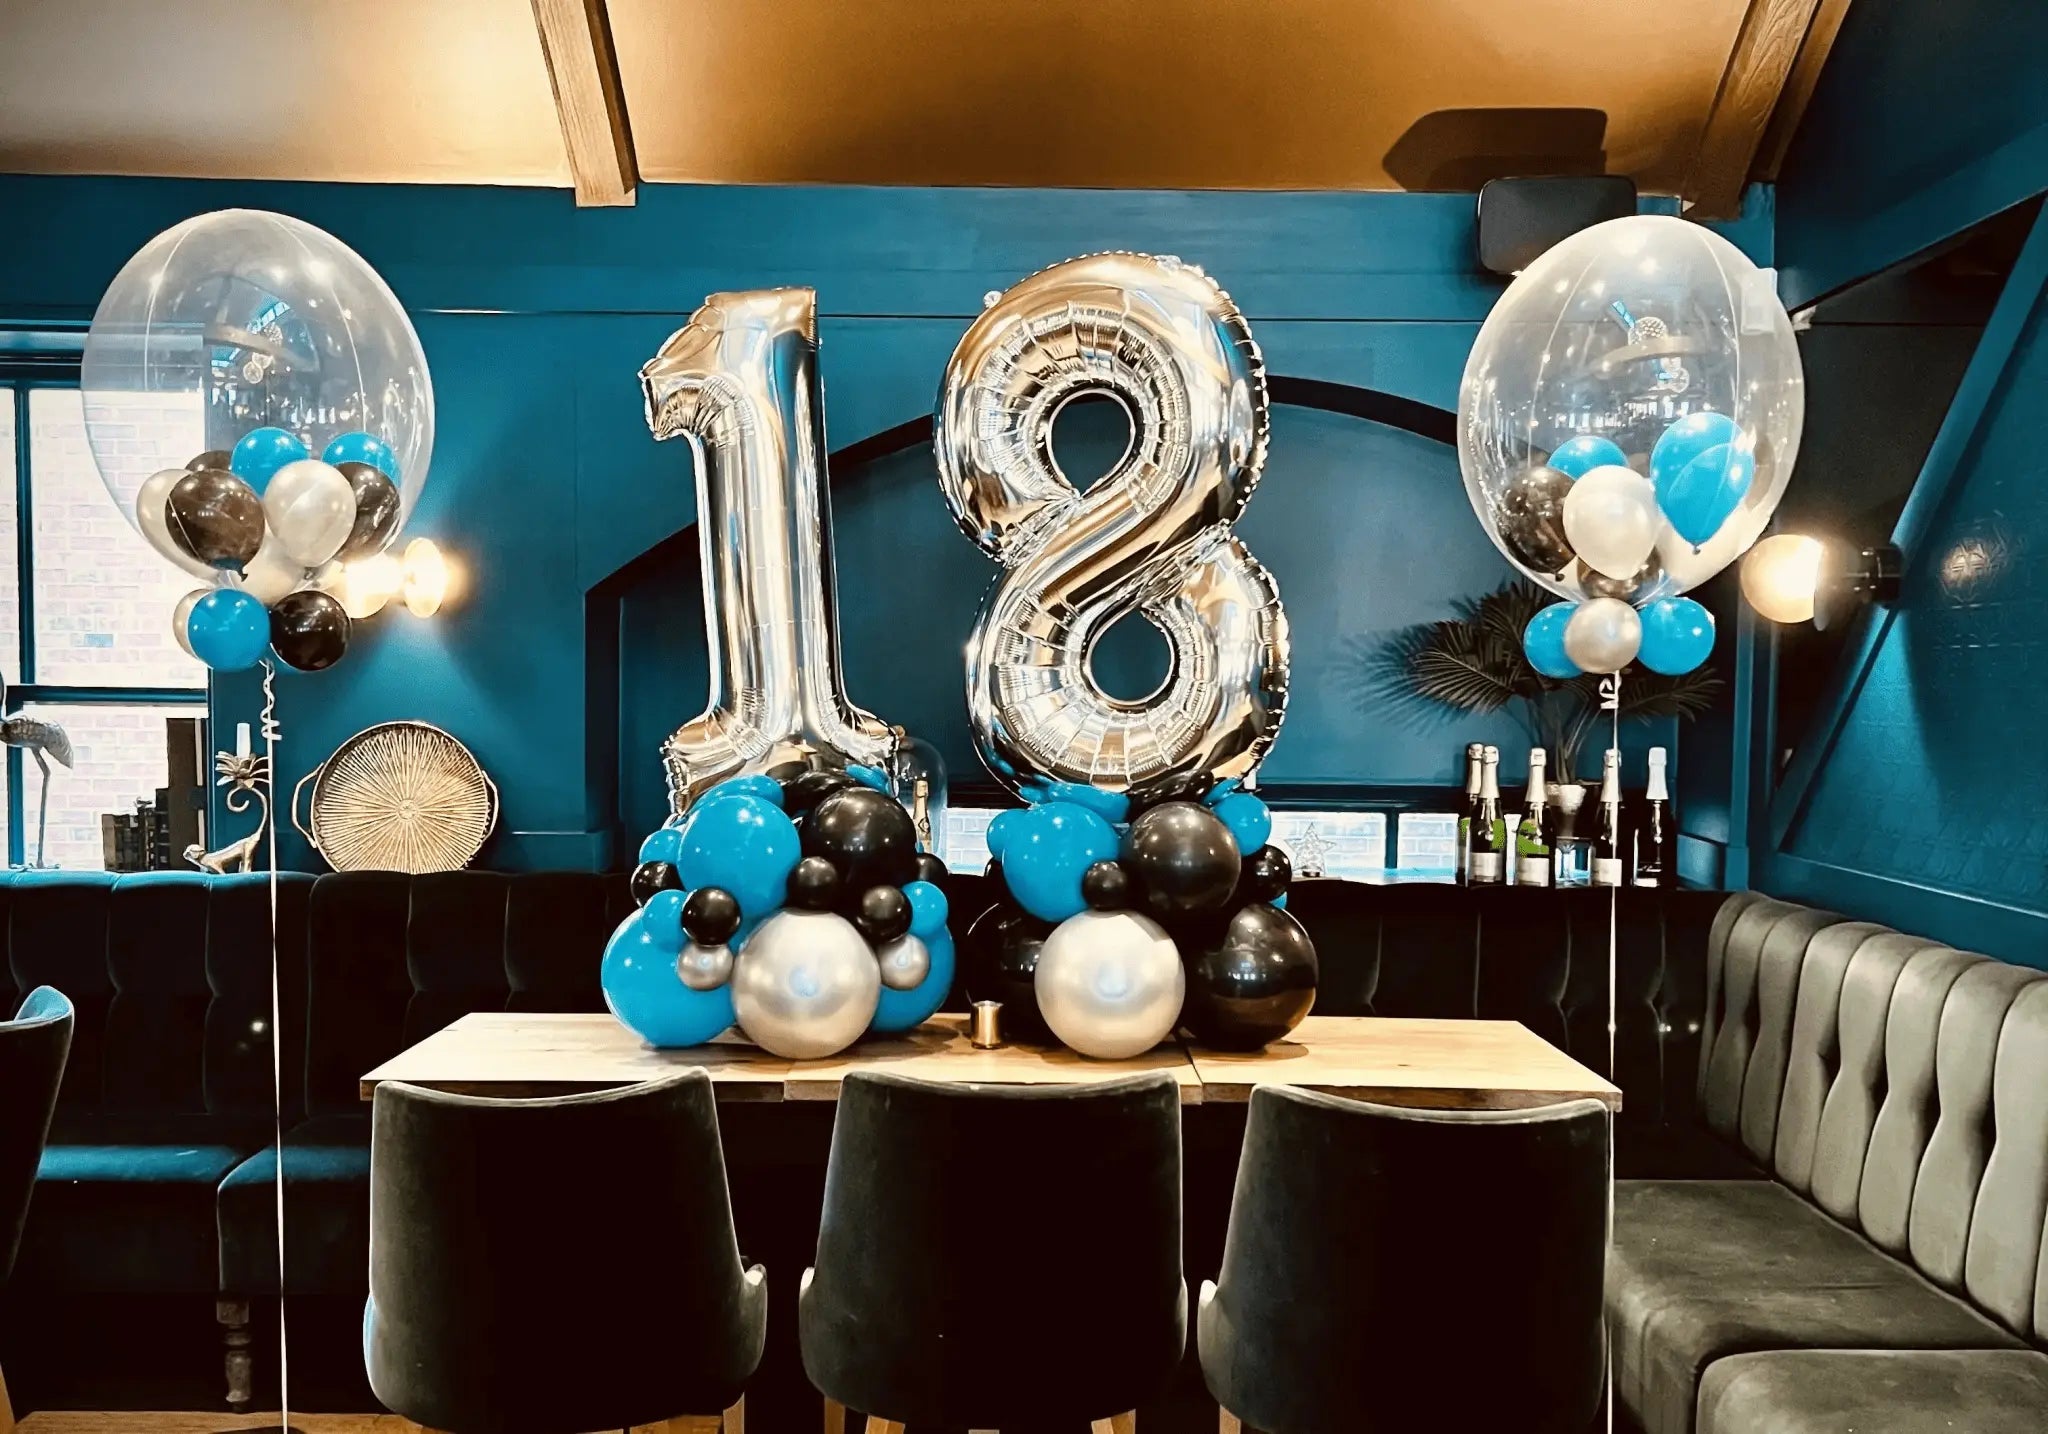 Air-Filled Balloon Displays: Fun, Inspiring and Playful Decorations for Special Occasions - The Party Hut